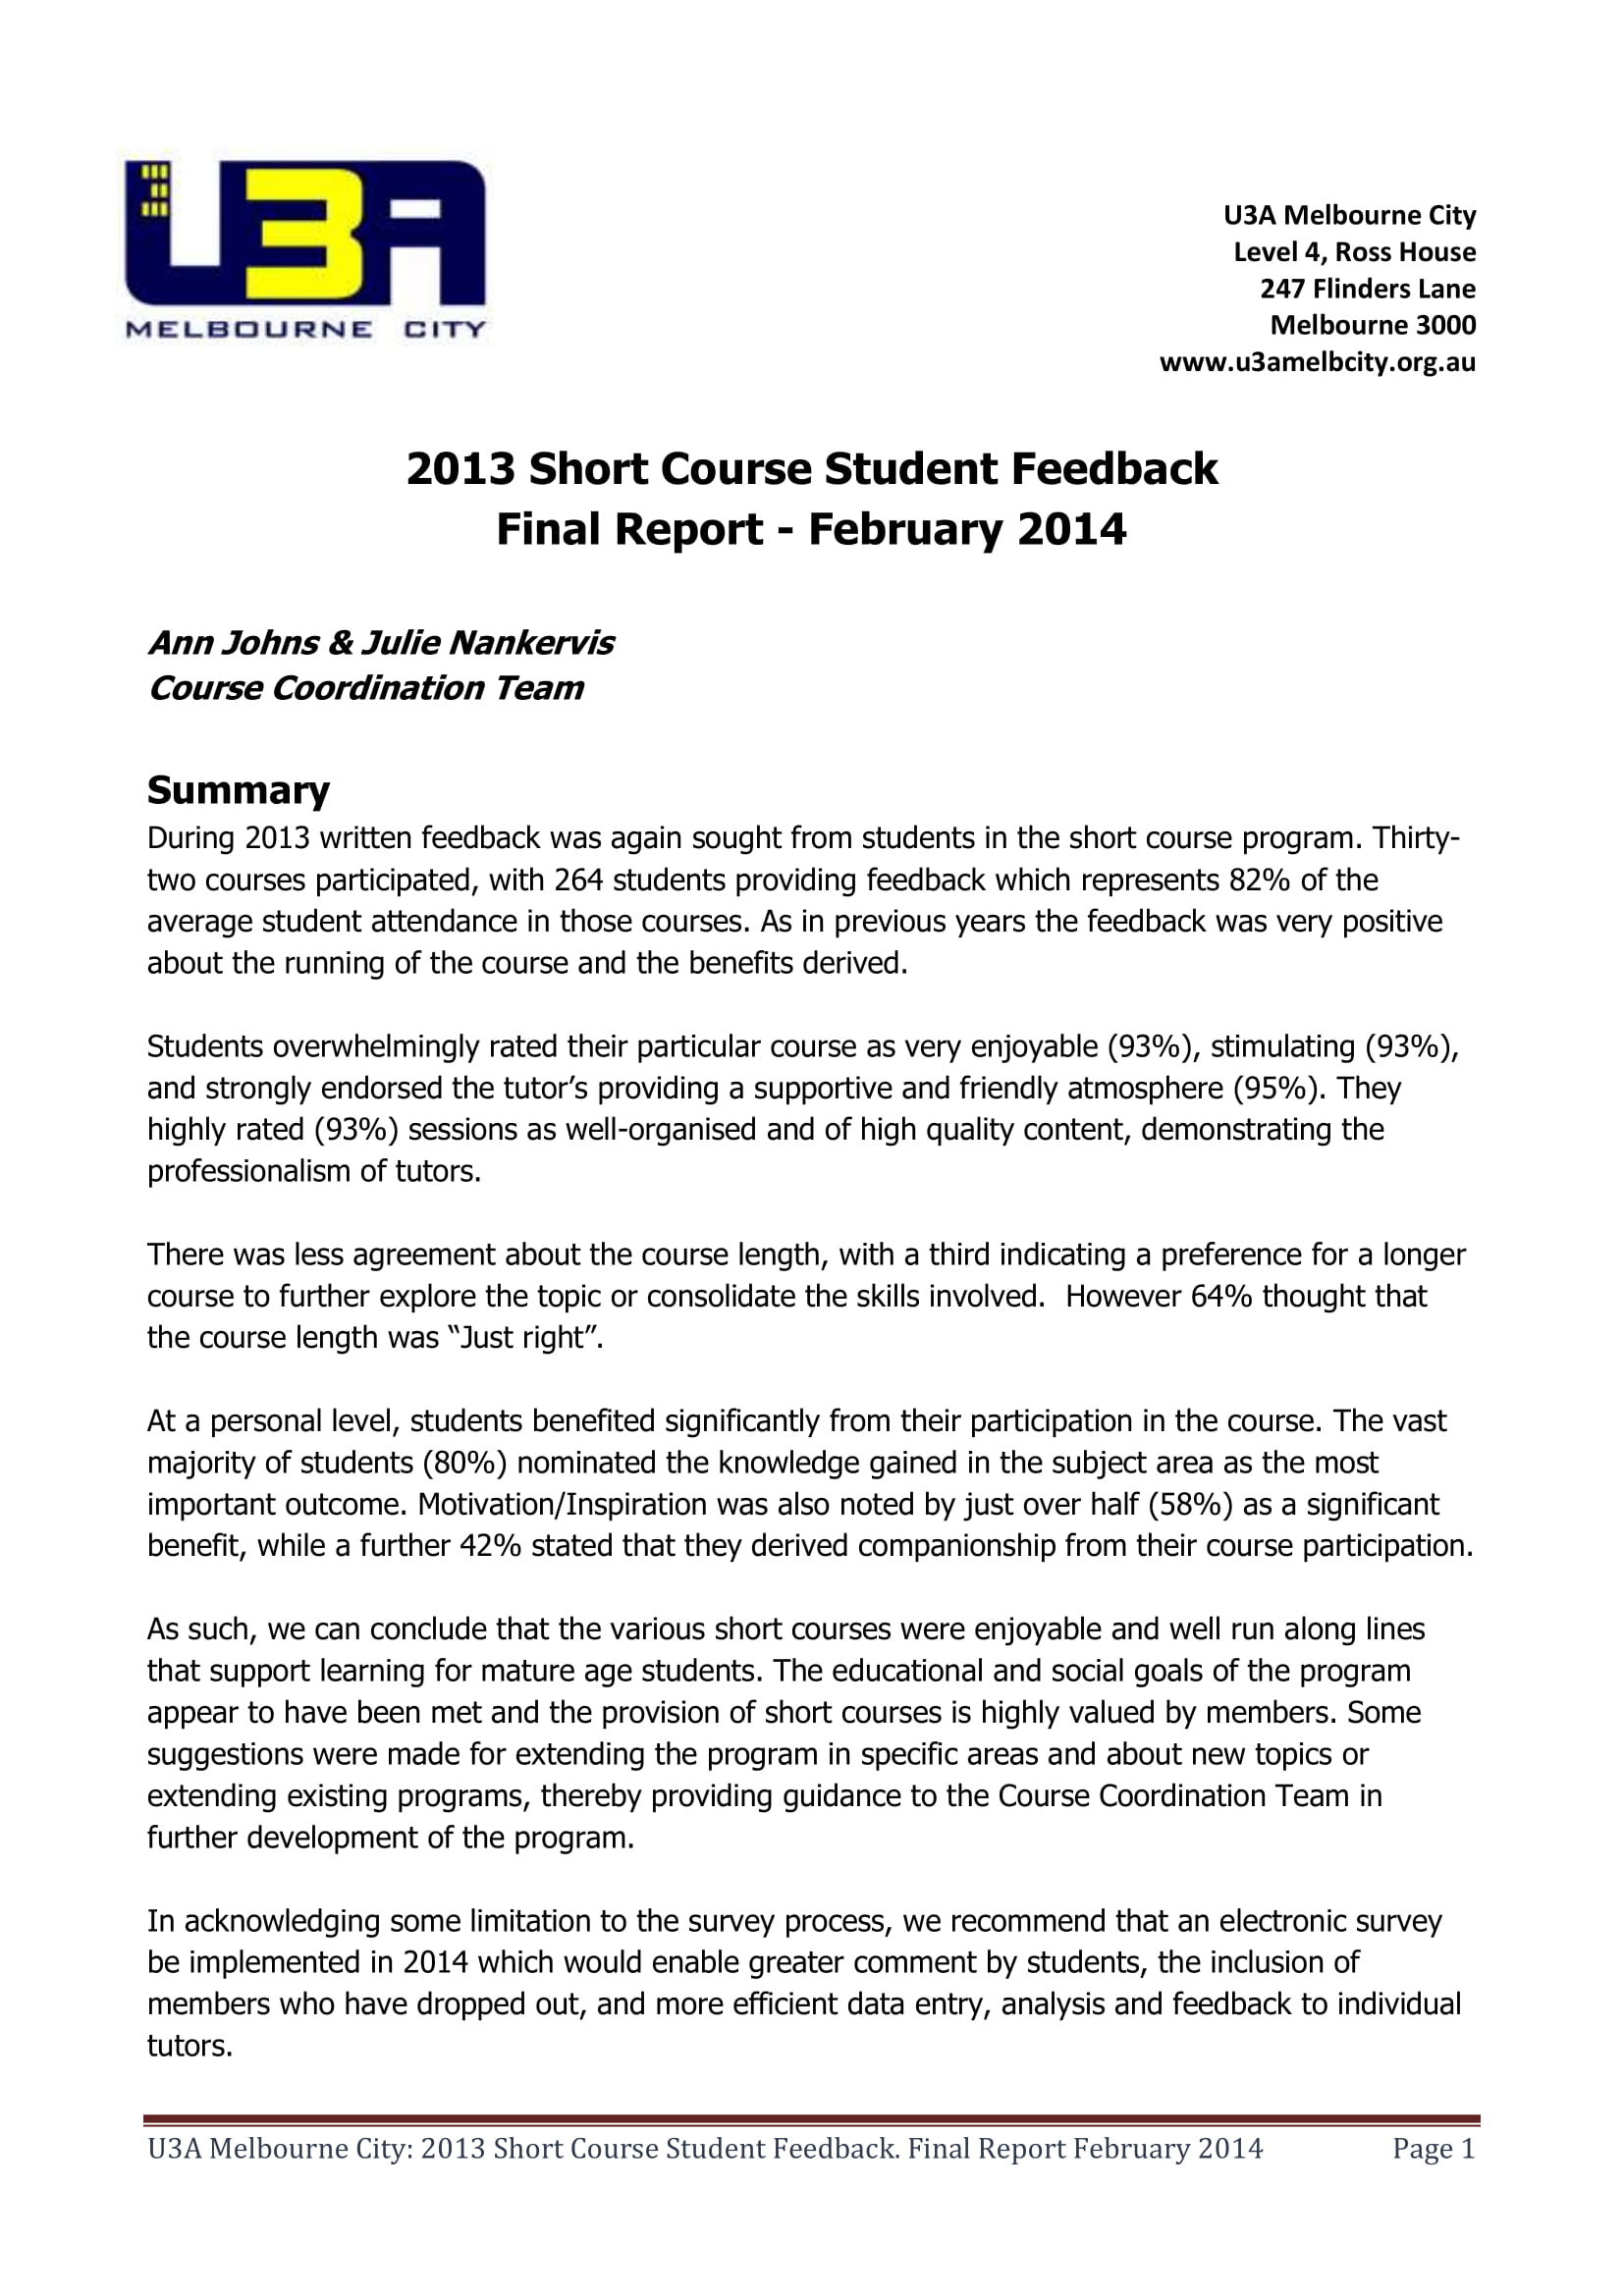 student course feedback report example1